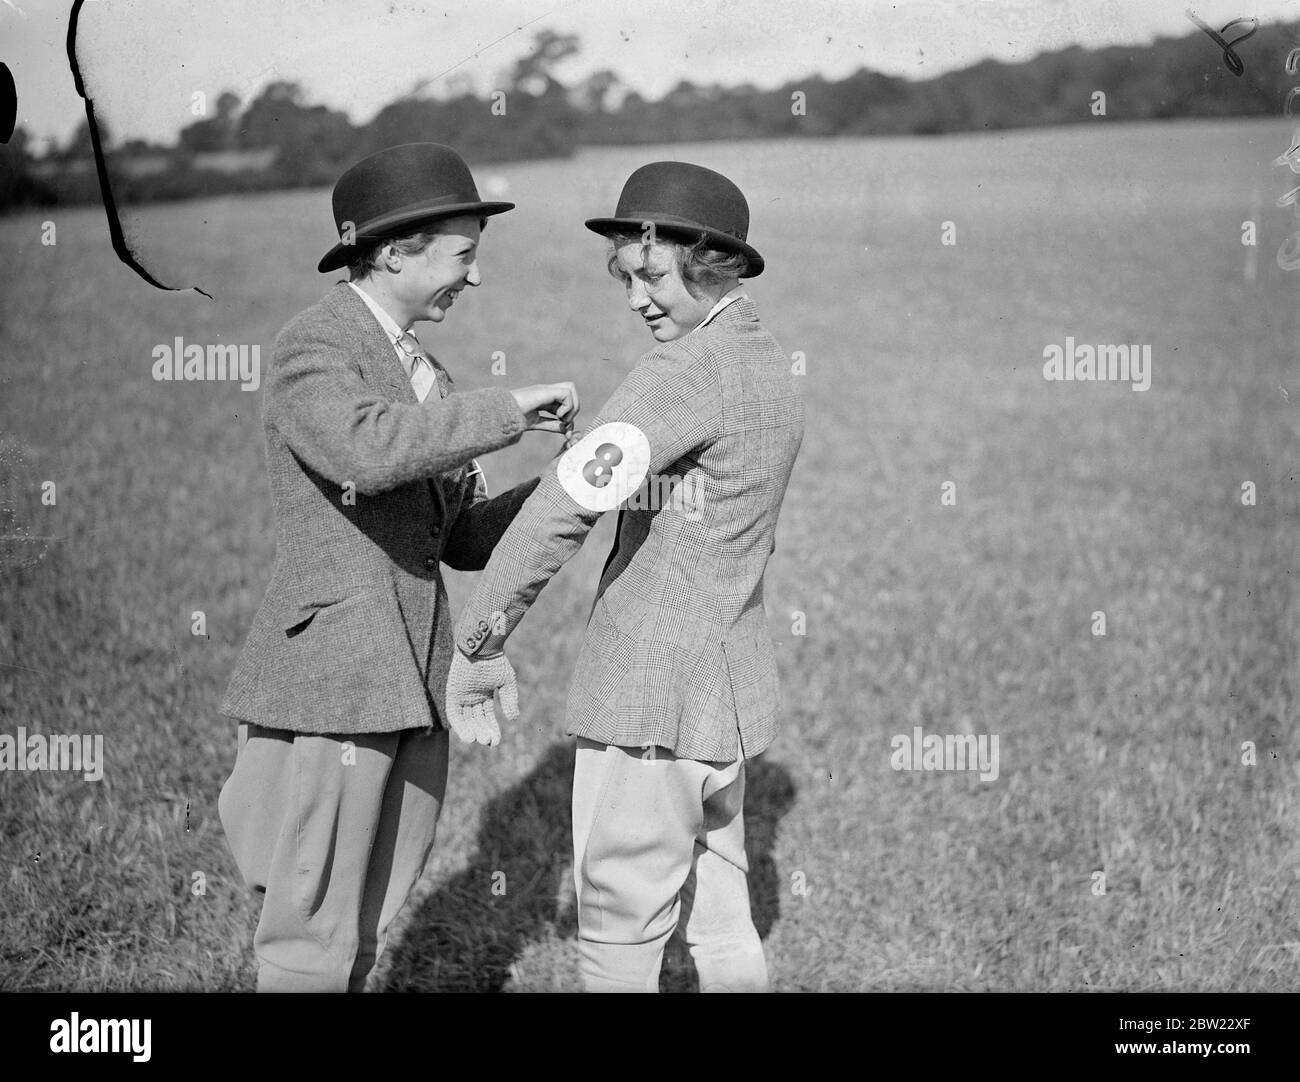 14 year old Miss Jones Williams (left) adjusting the number of Miss C Barton. aged 17. The Lockner riding school's horse show and Gymkhana was held at Sherborne Farm, Shere, Surrey. 18 September 1937. Stock Photo